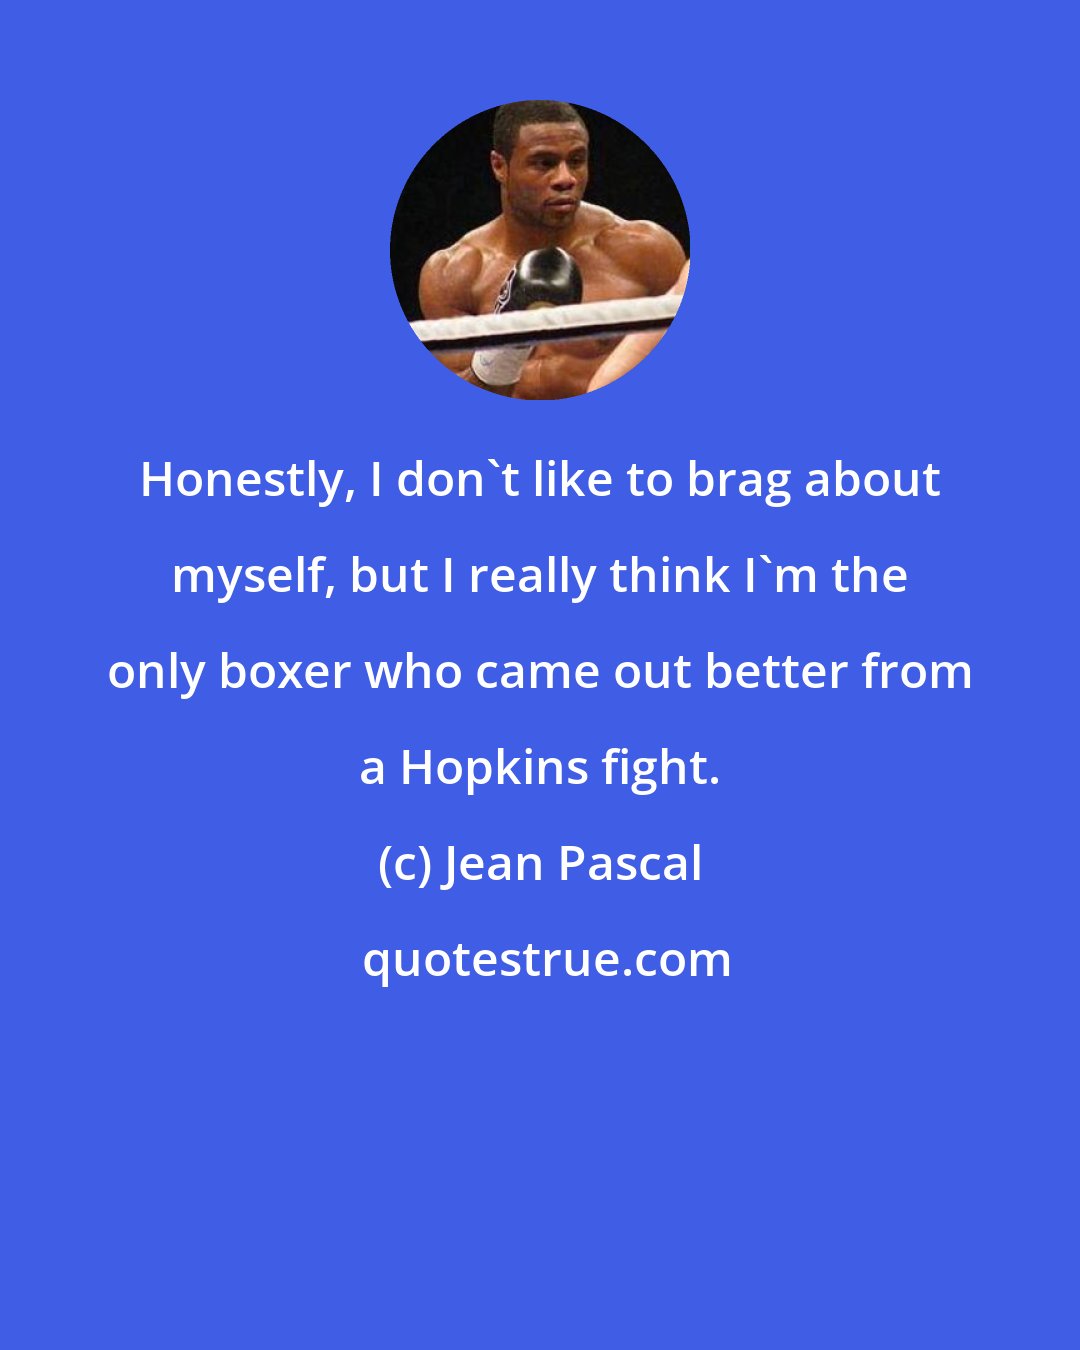 Jean Pascal: Honestly, I don't like to brag about myself, but I really think I'm the only boxer who came out better from a Hopkins fight.